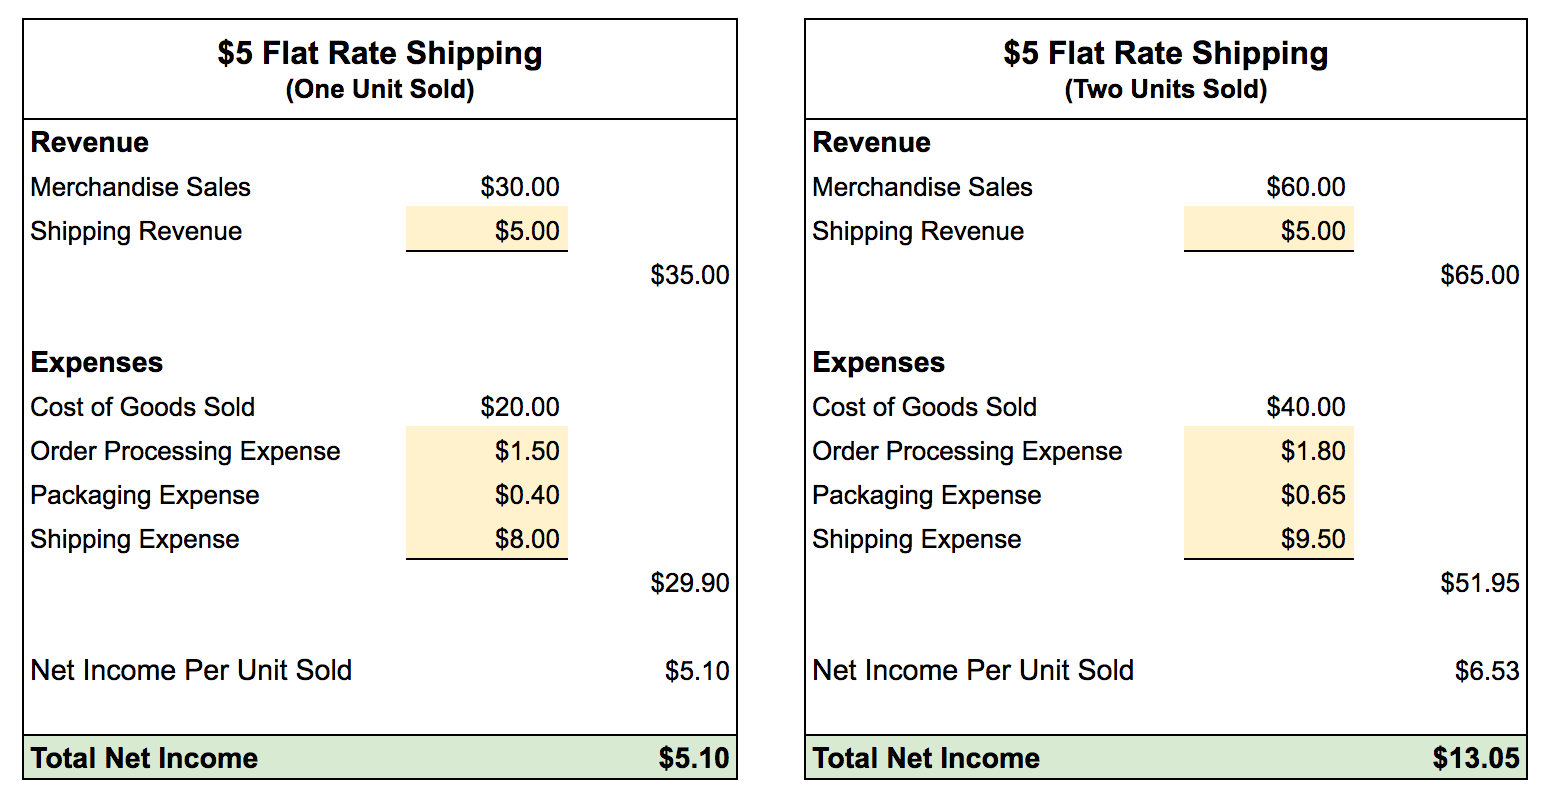 In this example, offering flat rate shipping for $5 produces a net income of $5.10 for a single unit sold. When two units are sold, the net income increases to $13.05.